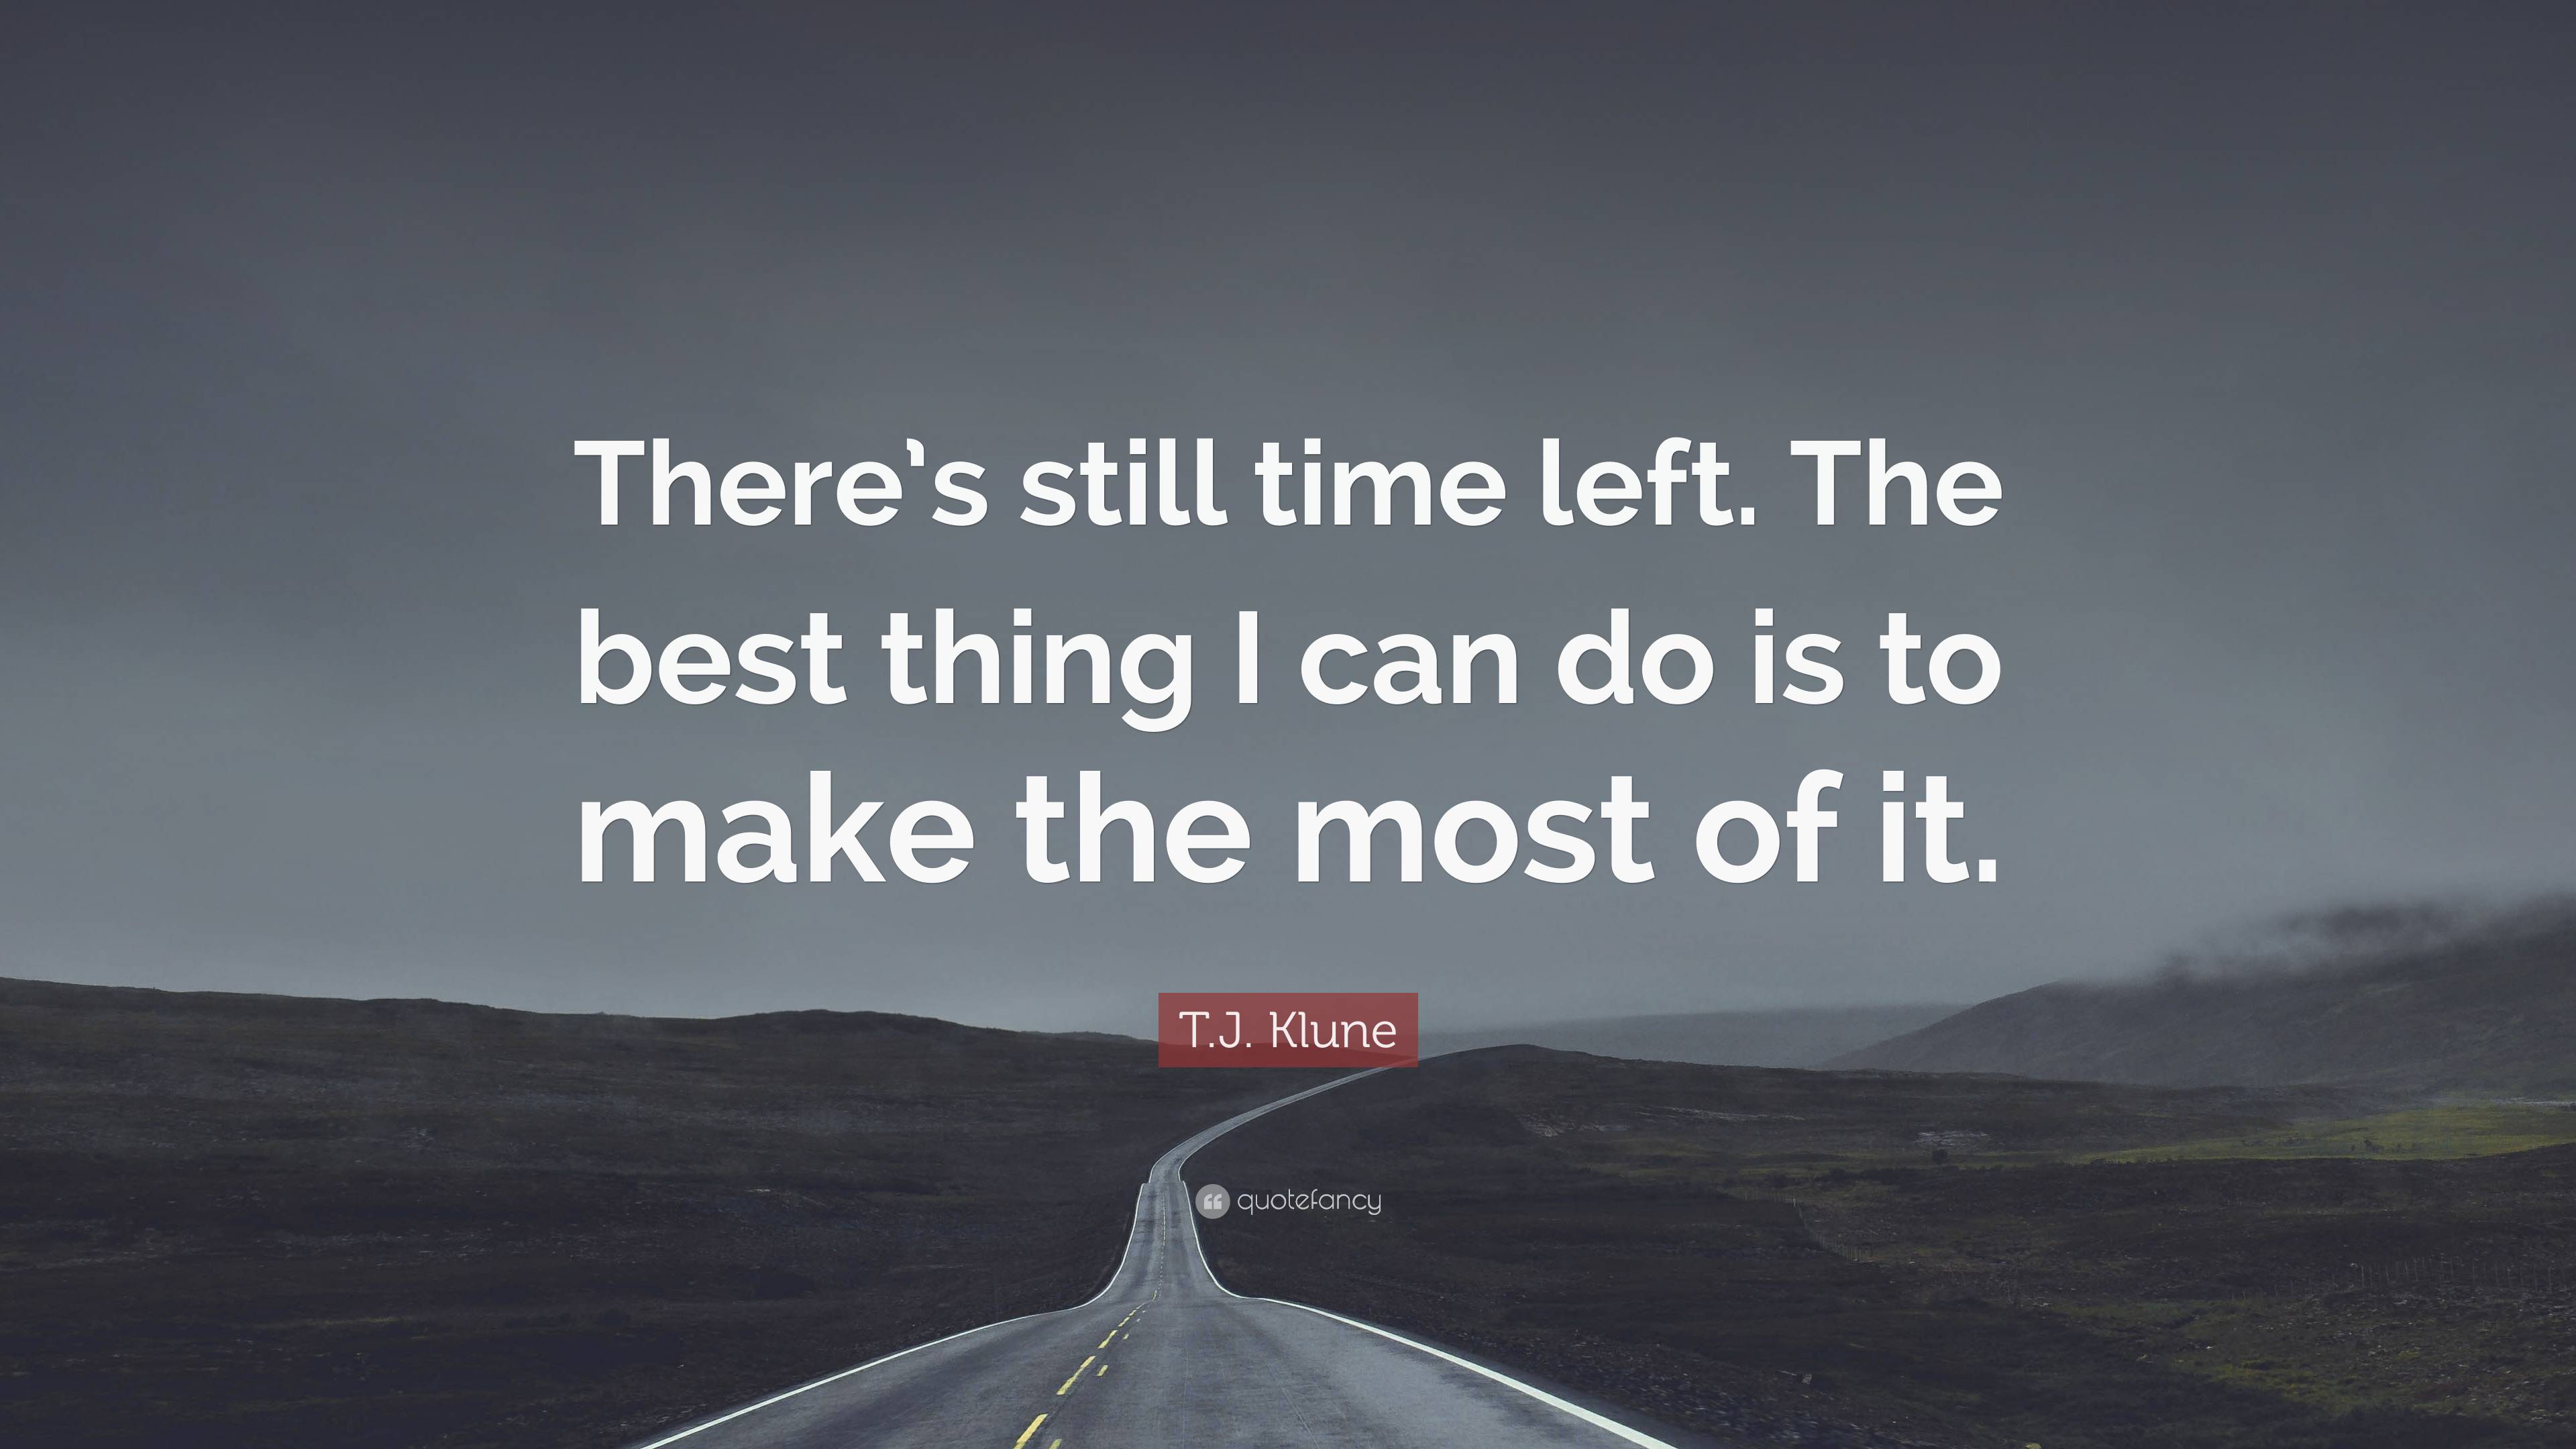 T.J. Klune Quote: “There’s still time left. The best thing I can do is ...